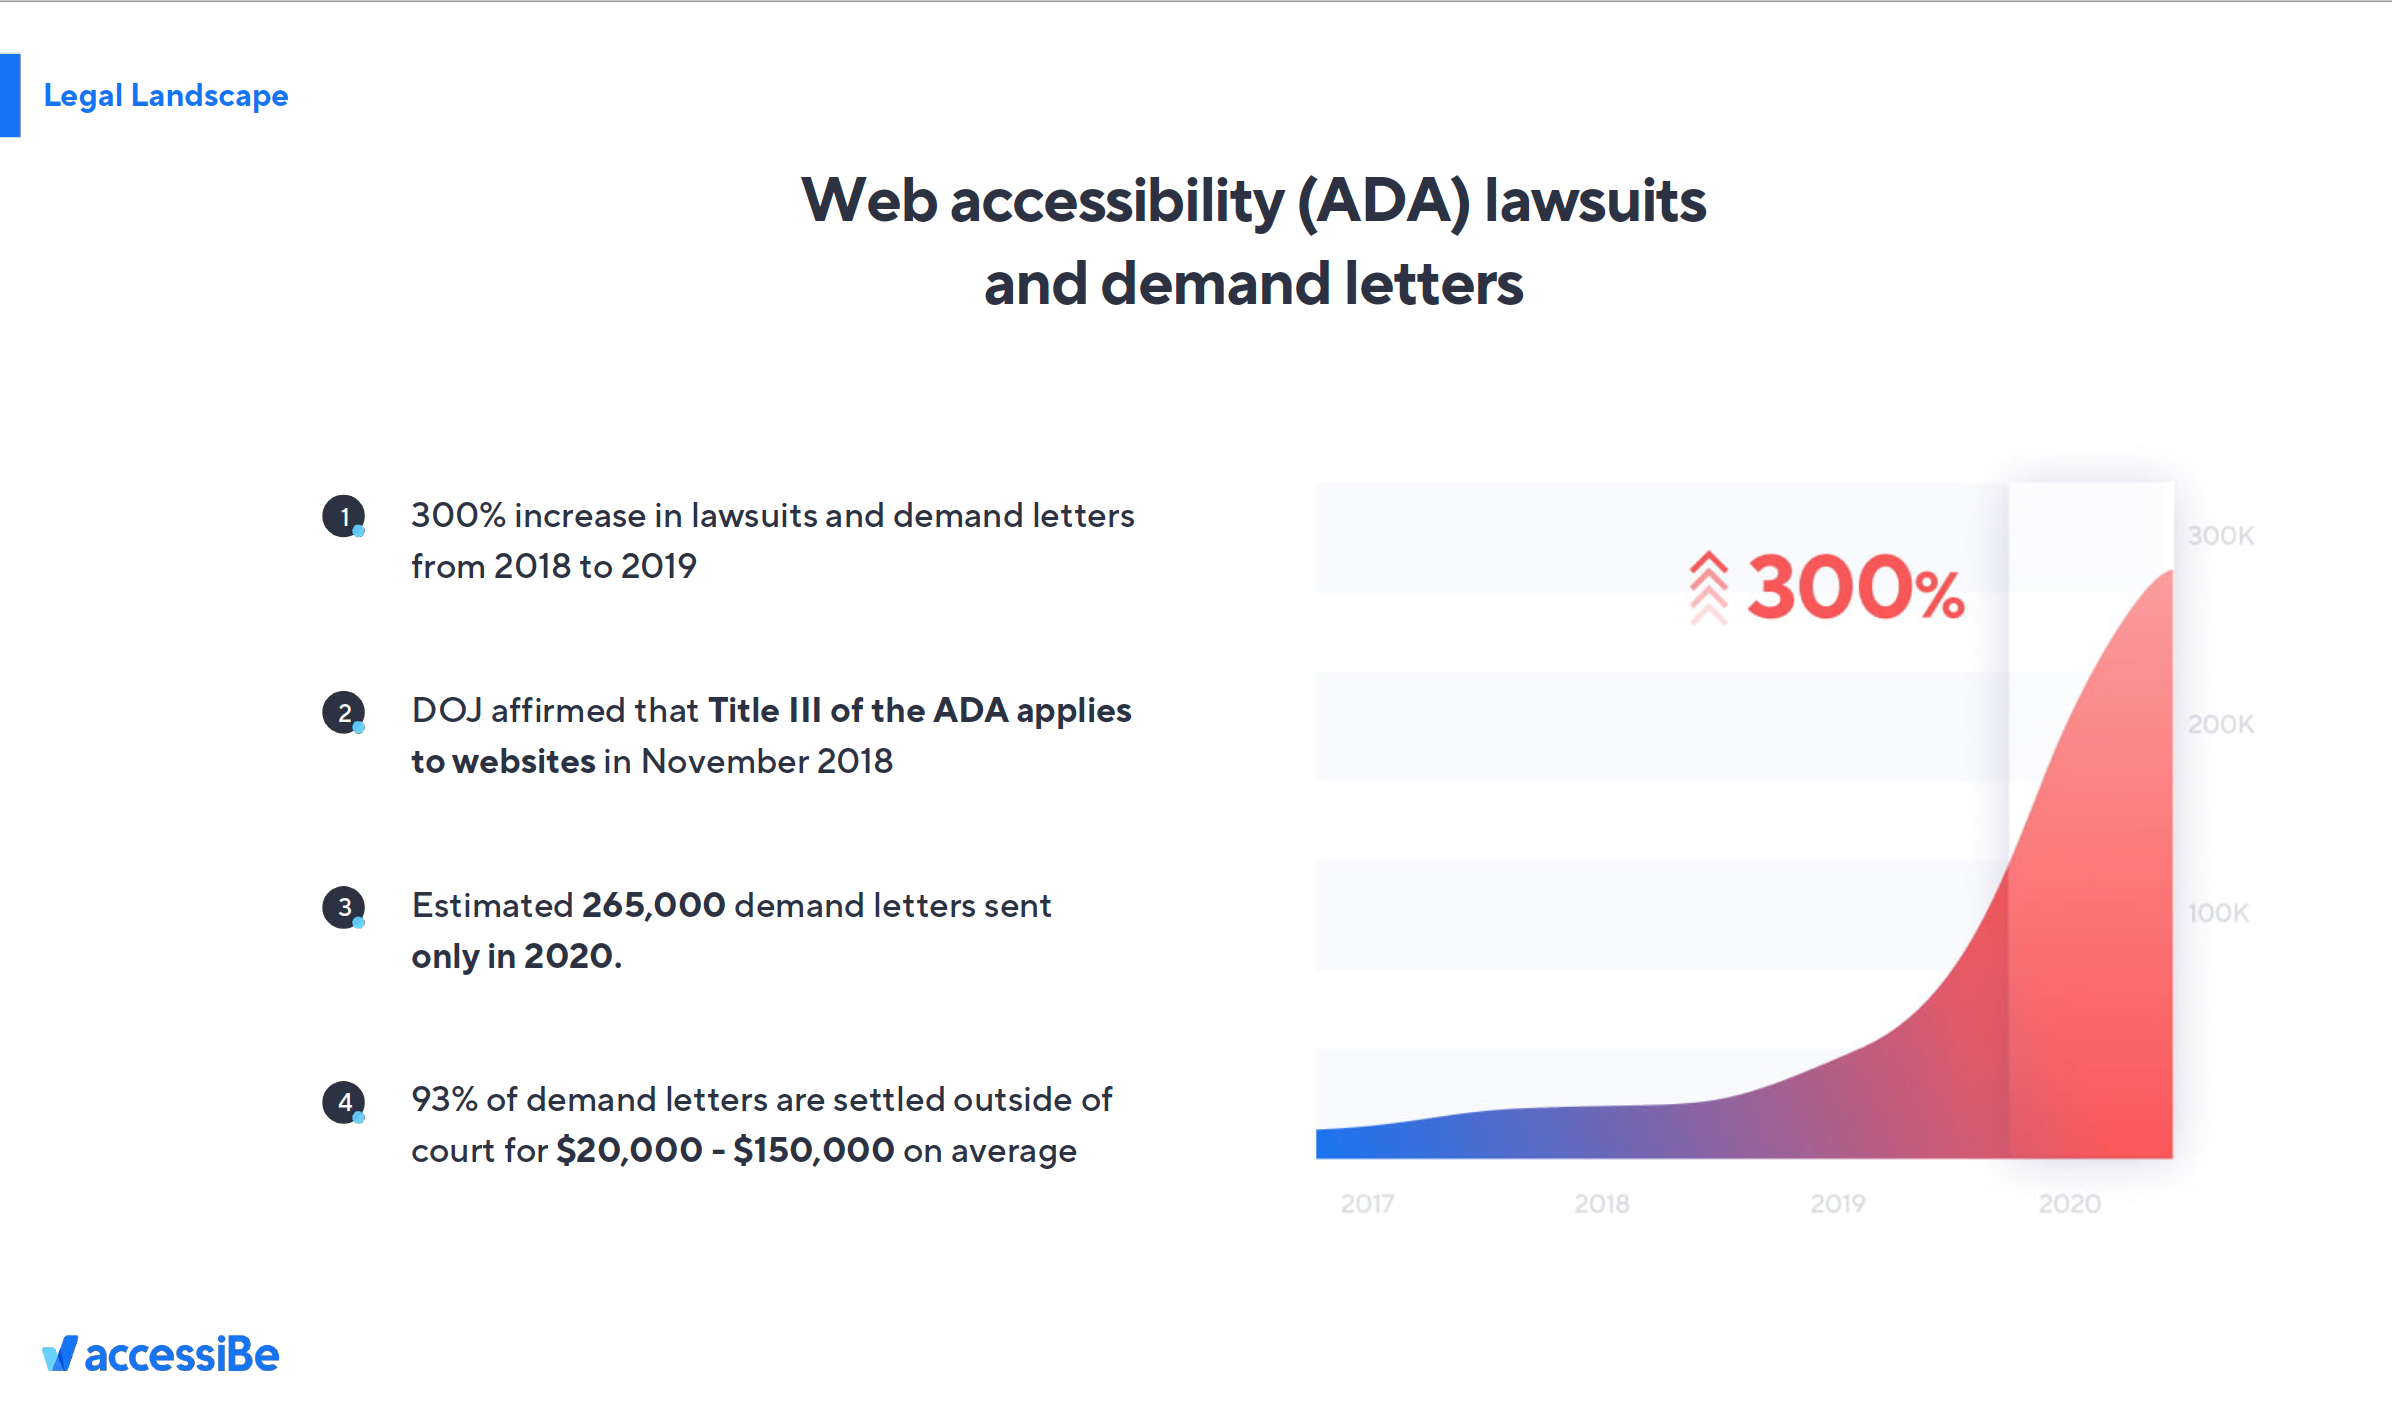 Web Accessibility Lawsuits